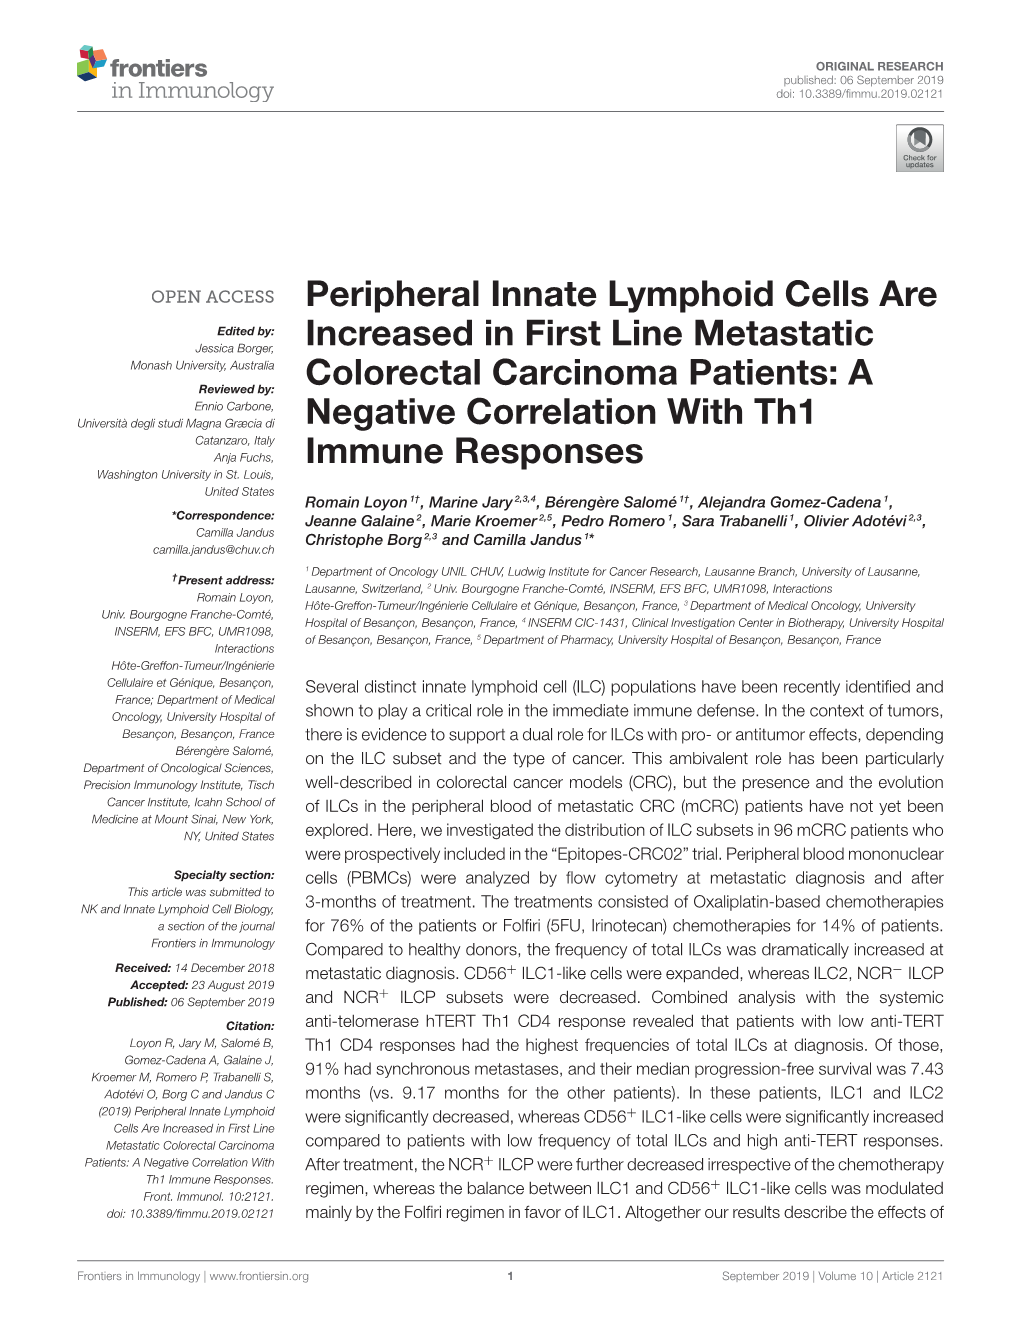 Peripheral Innate Lymphoid Cells Are Increased in First Line Metastatic Colorectal Carcinoma Patients